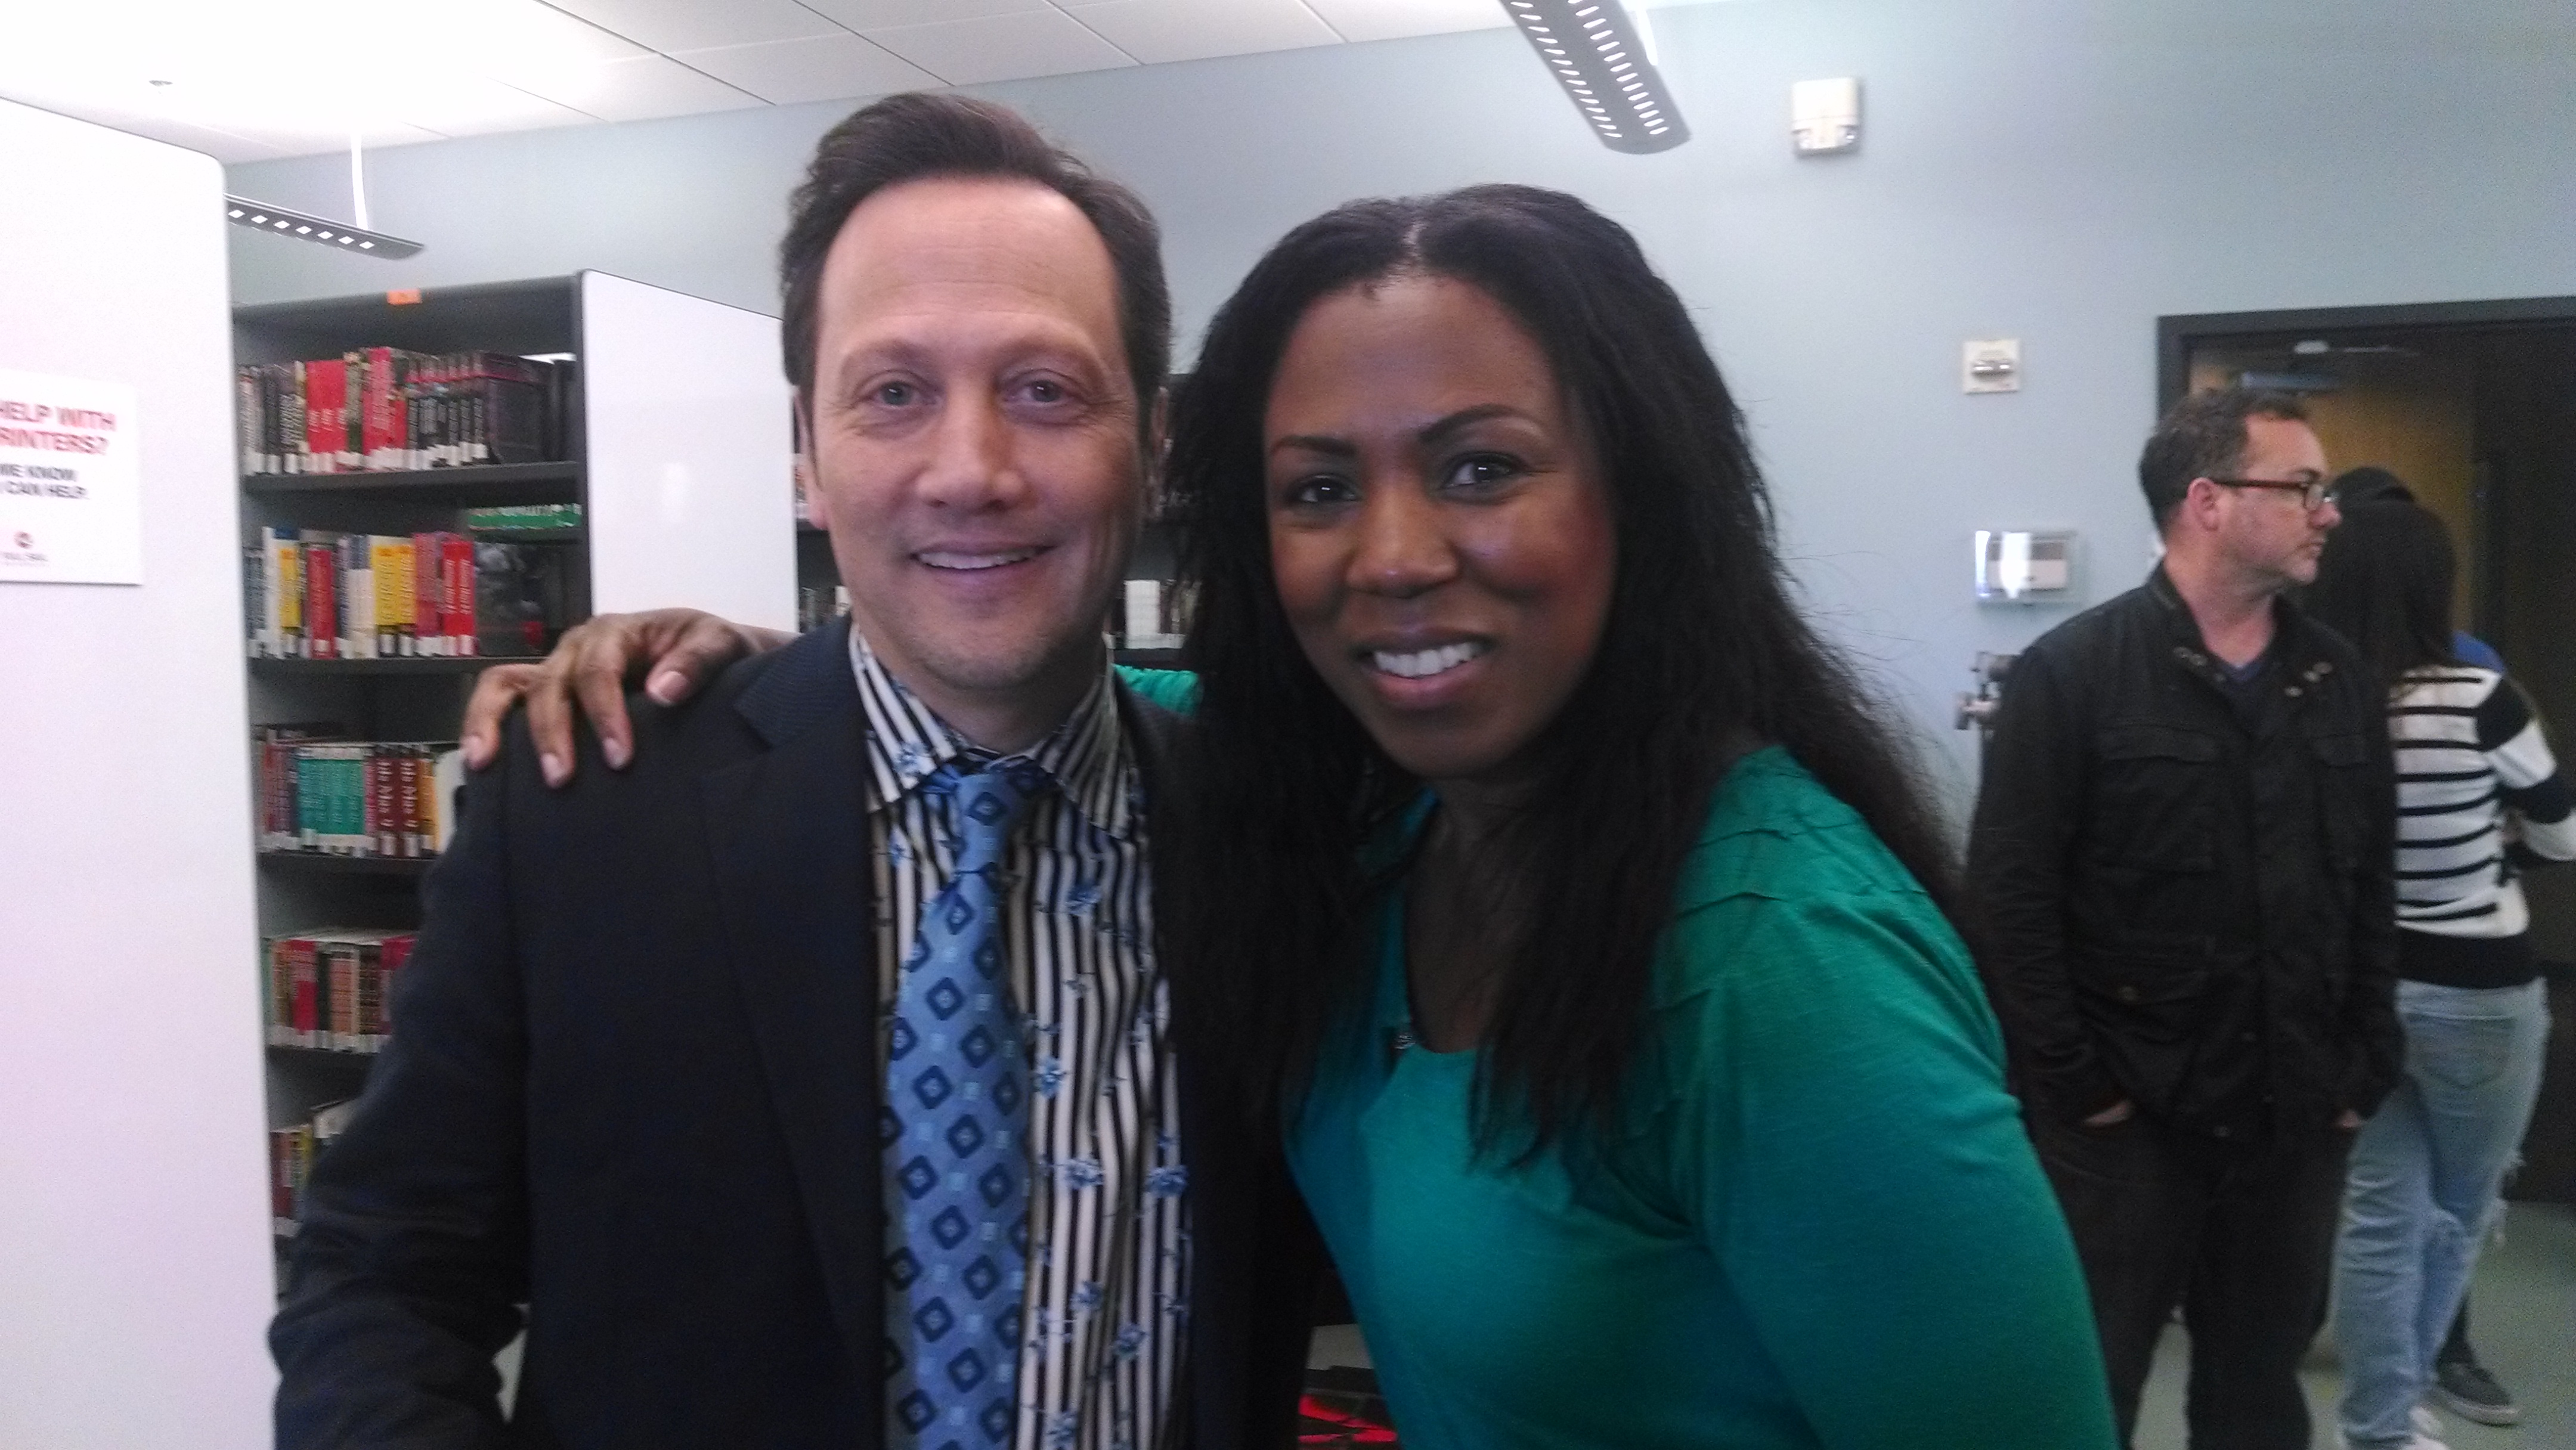 On set for 'The Real Rob' with Rob Schneider